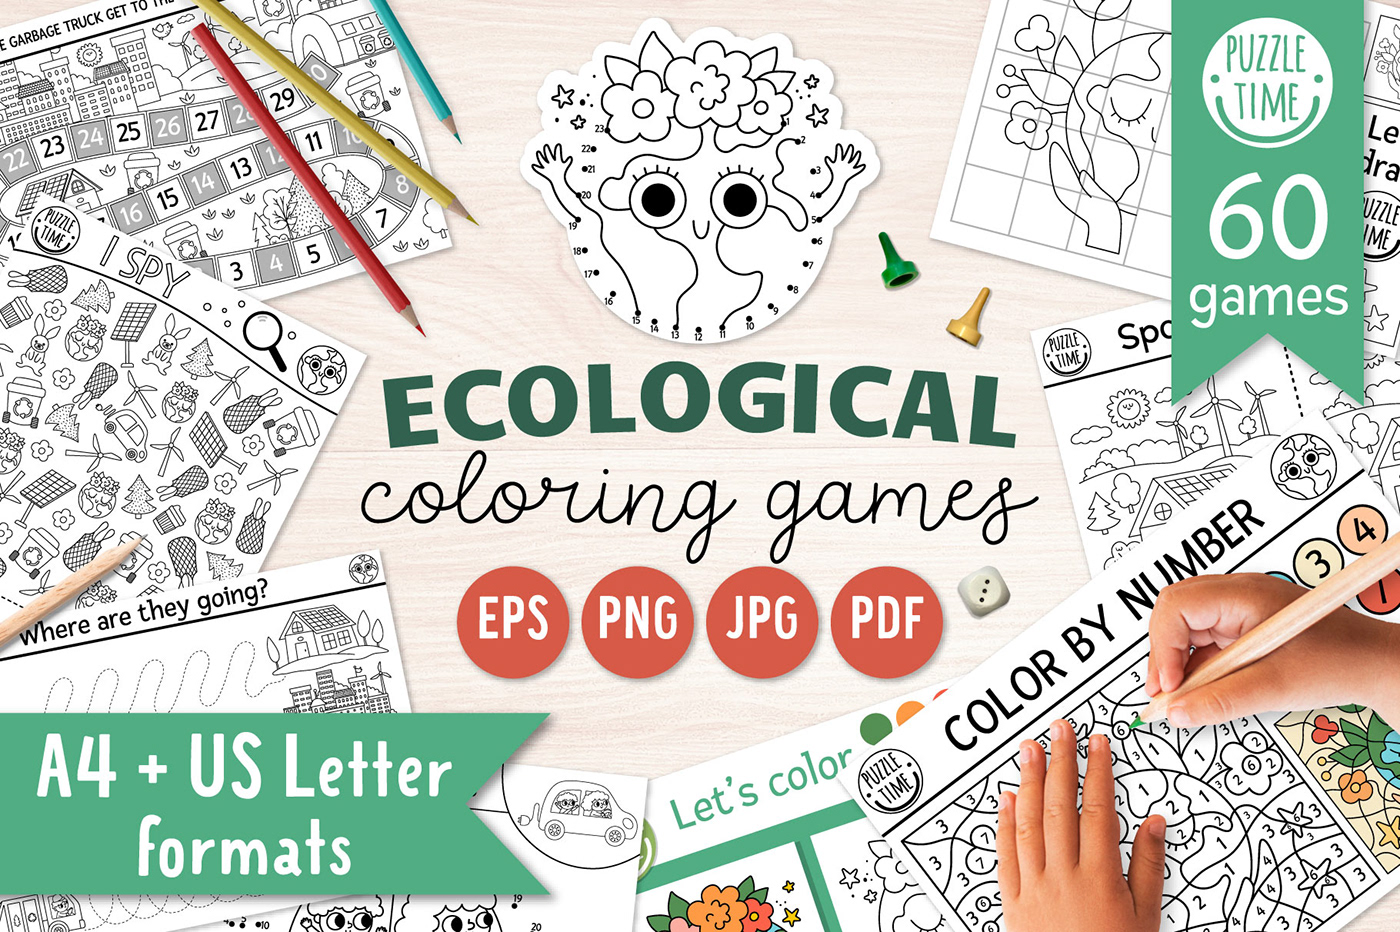 activities coloring book coloring page earth day eco awareness ecological Games kids printable worksheet zero waste